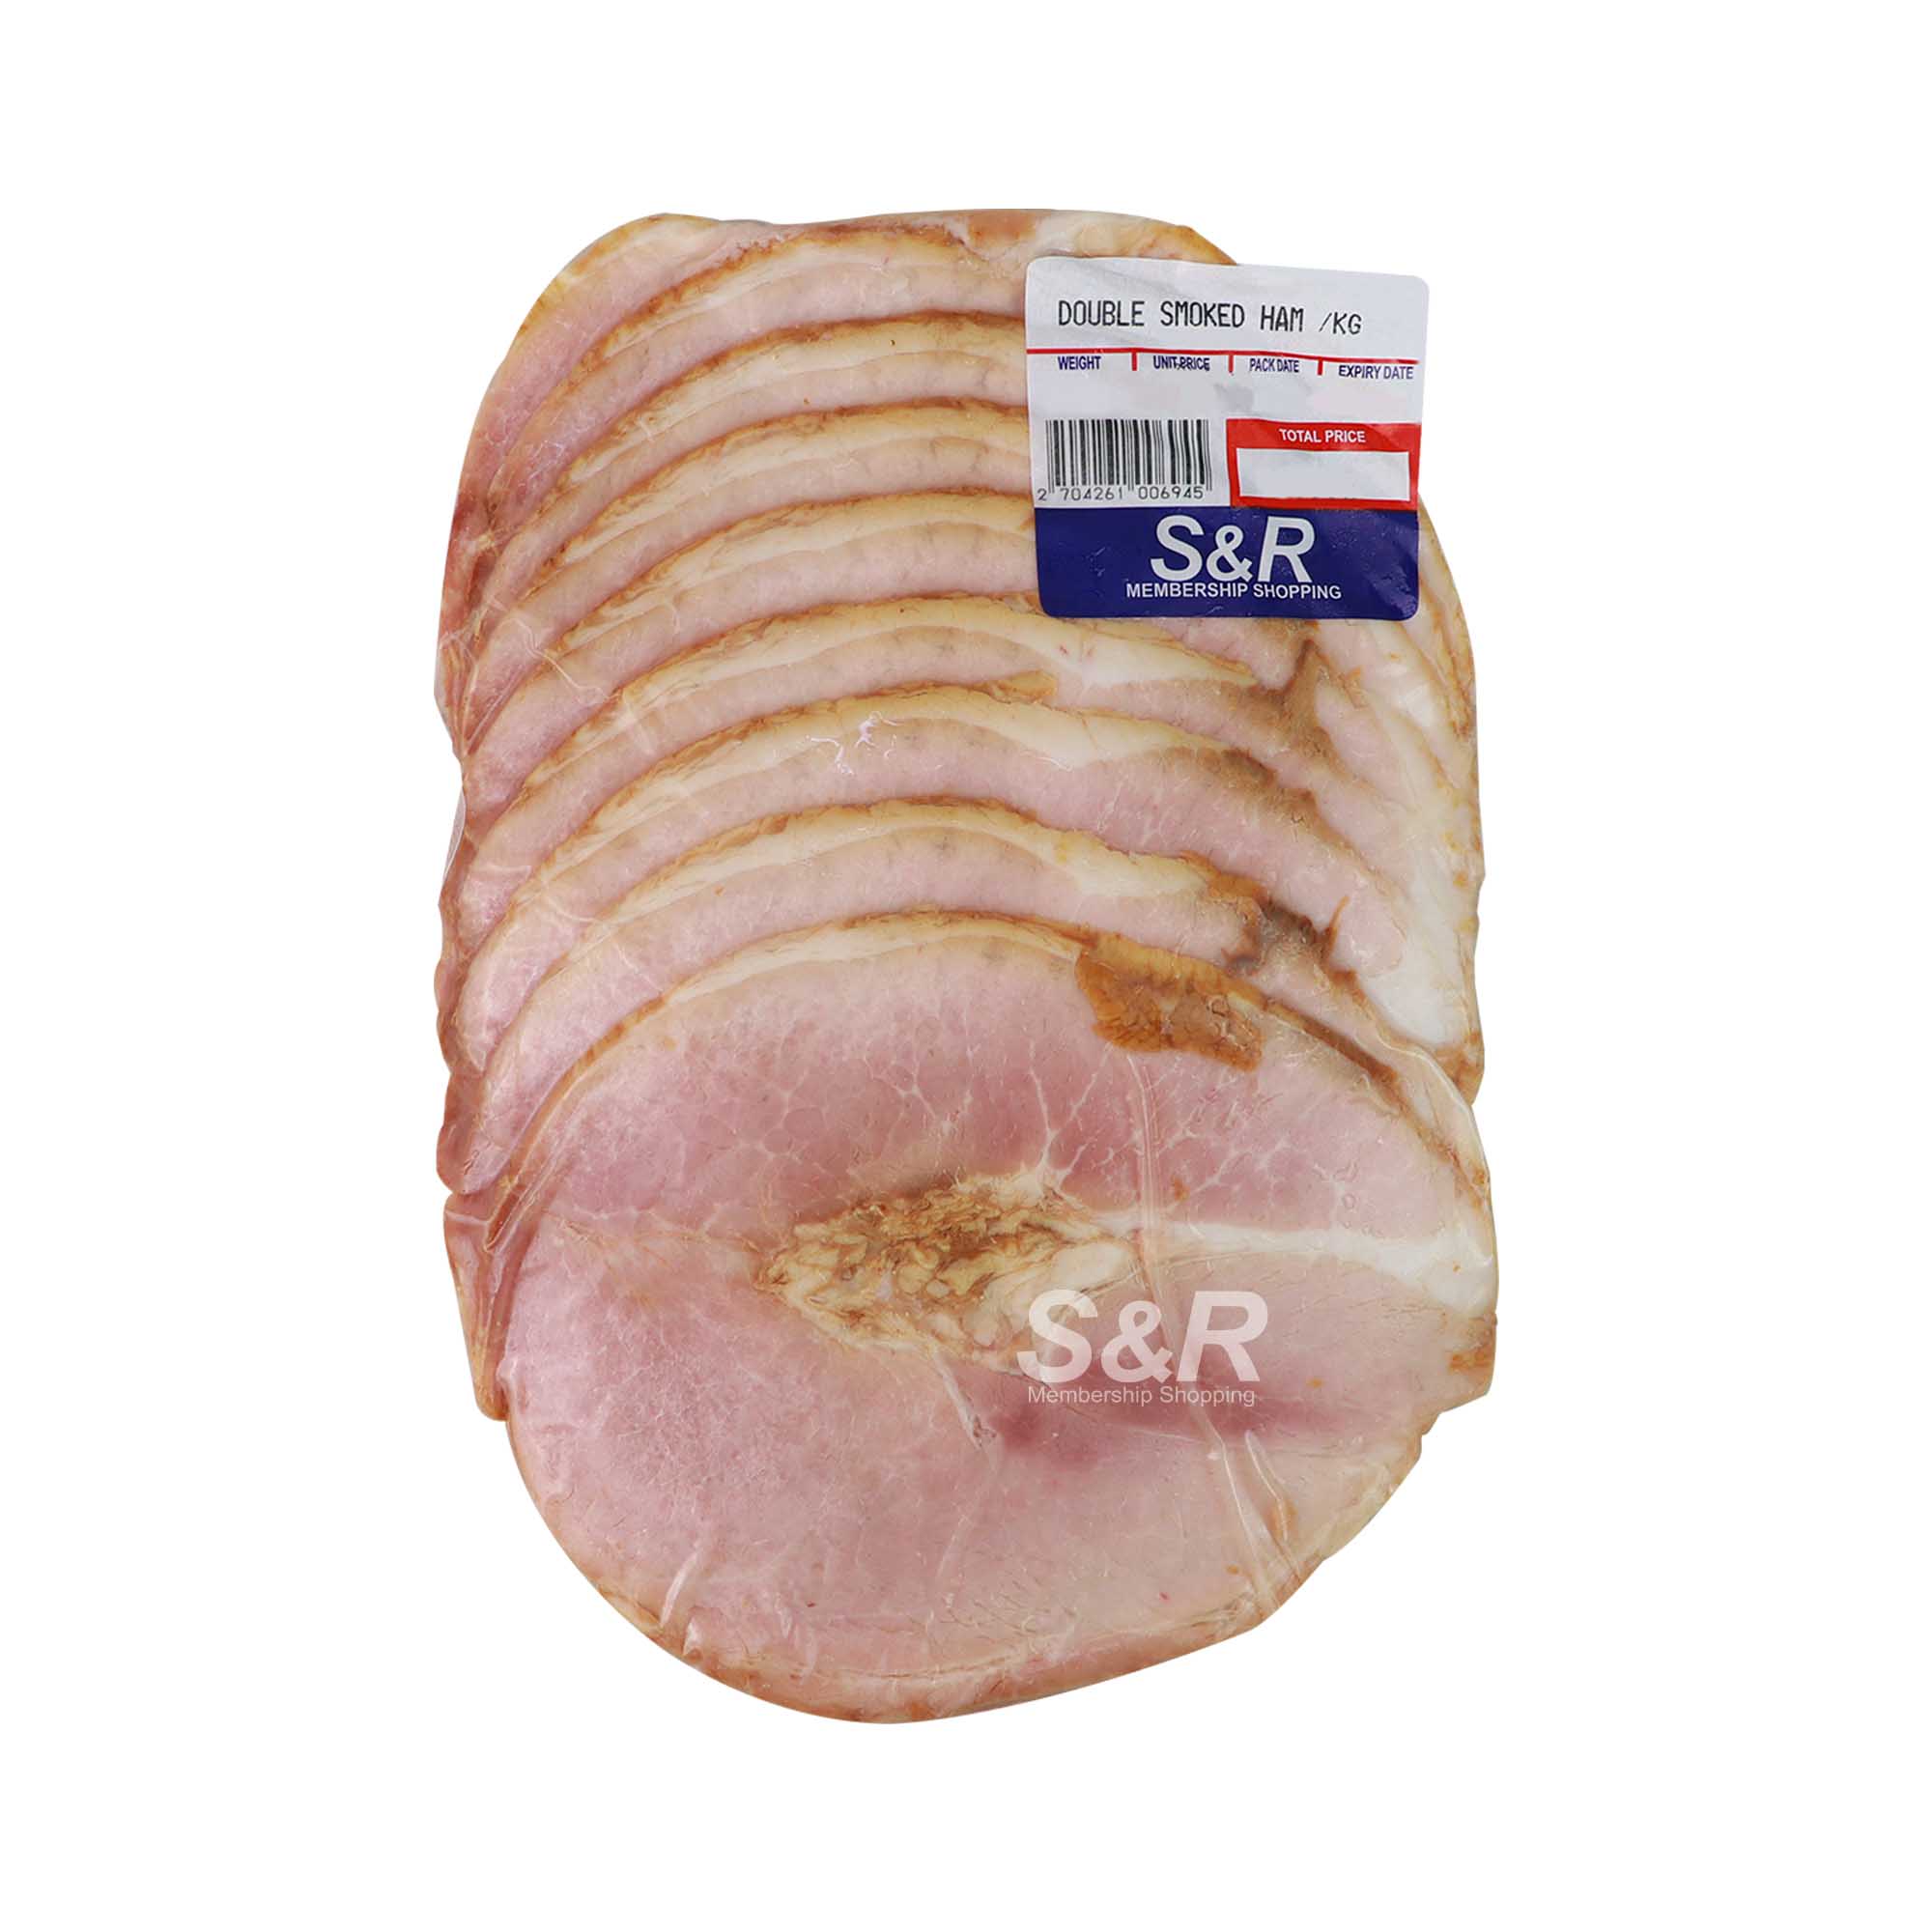 S&R Double Smoked Ham approx. 1kg